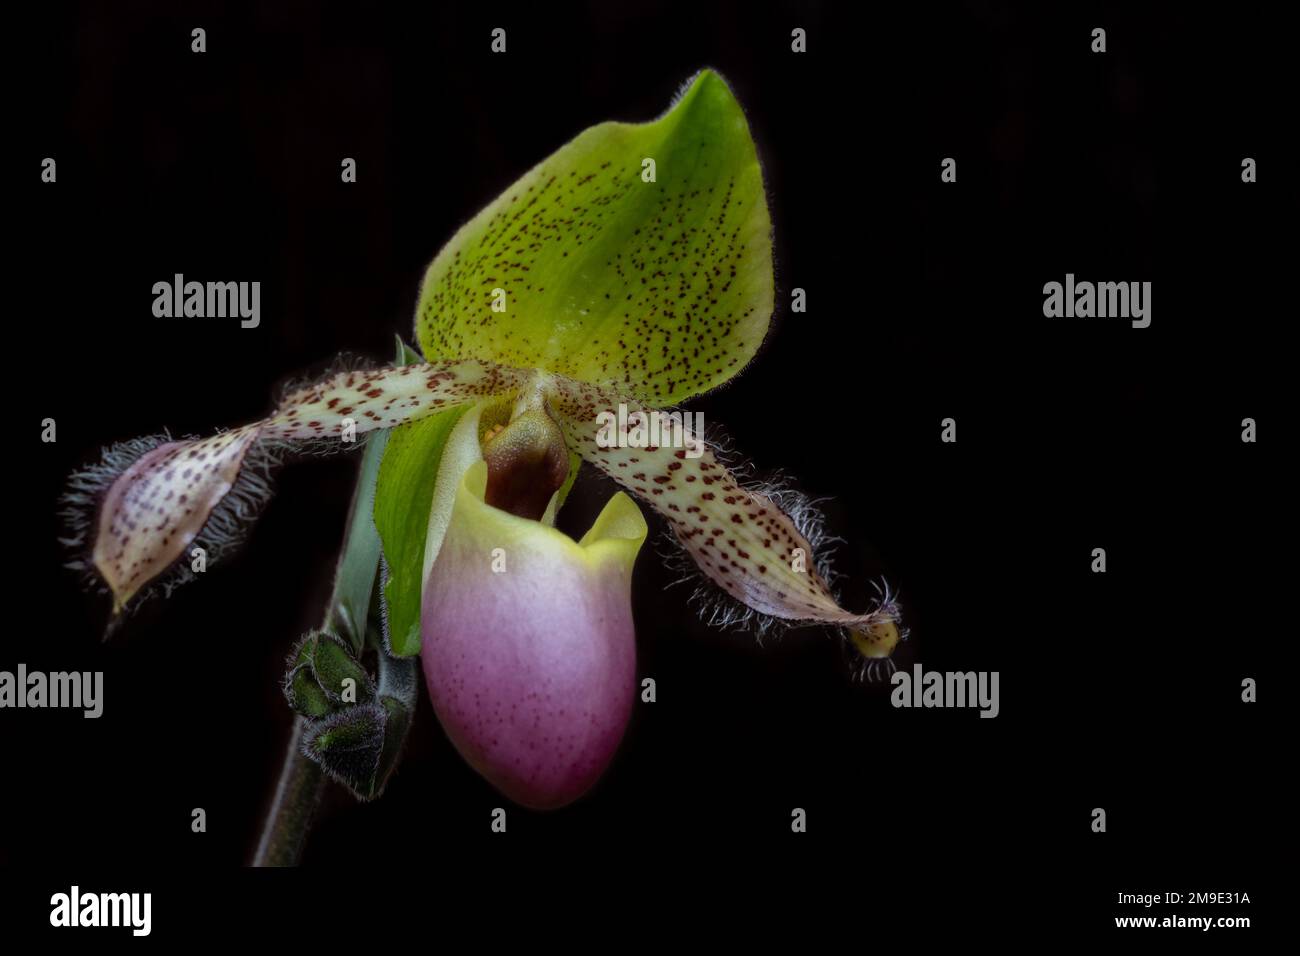 Closeup view of colorful yellow green and purple flower of lady slipper orchid species paphiopedilum moquetteanum isolated on black background Stock Photo